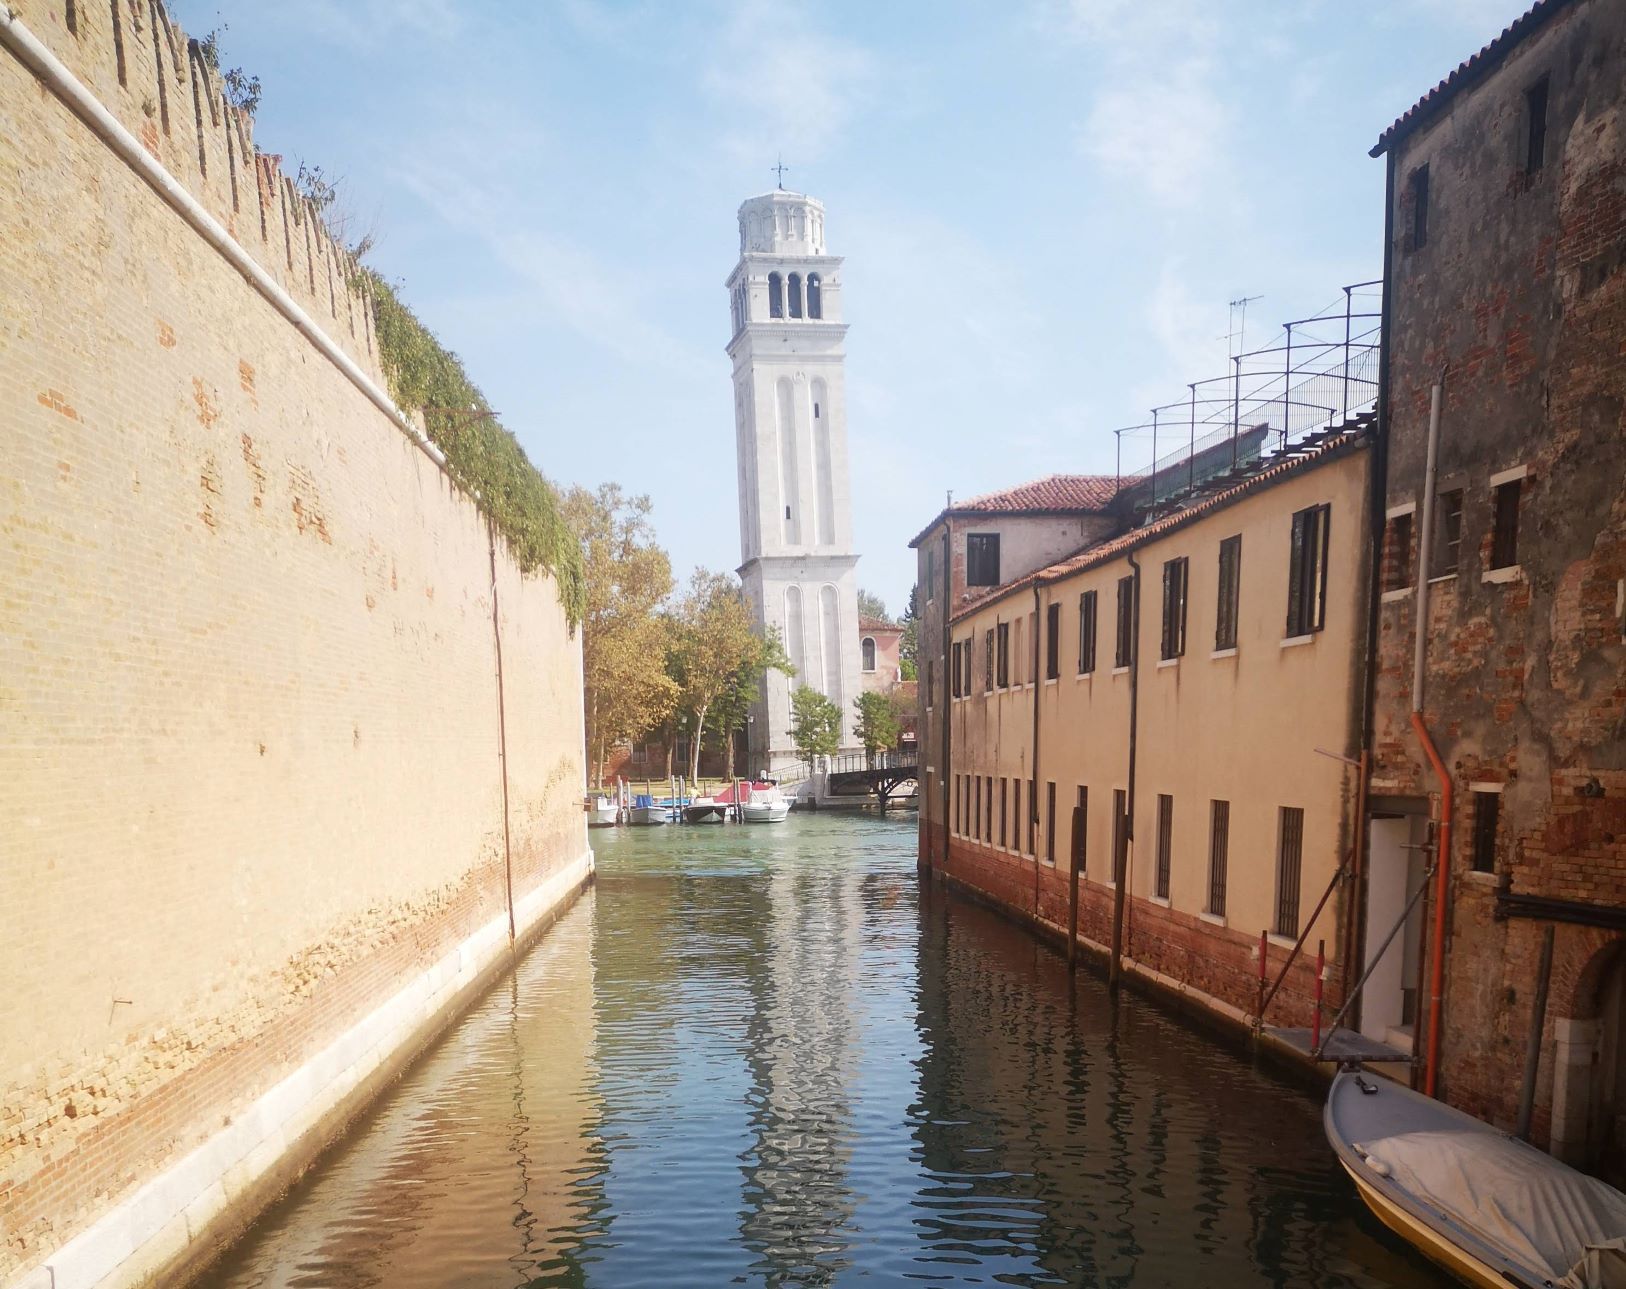 Support for Venice Biennale Fellowship Applications